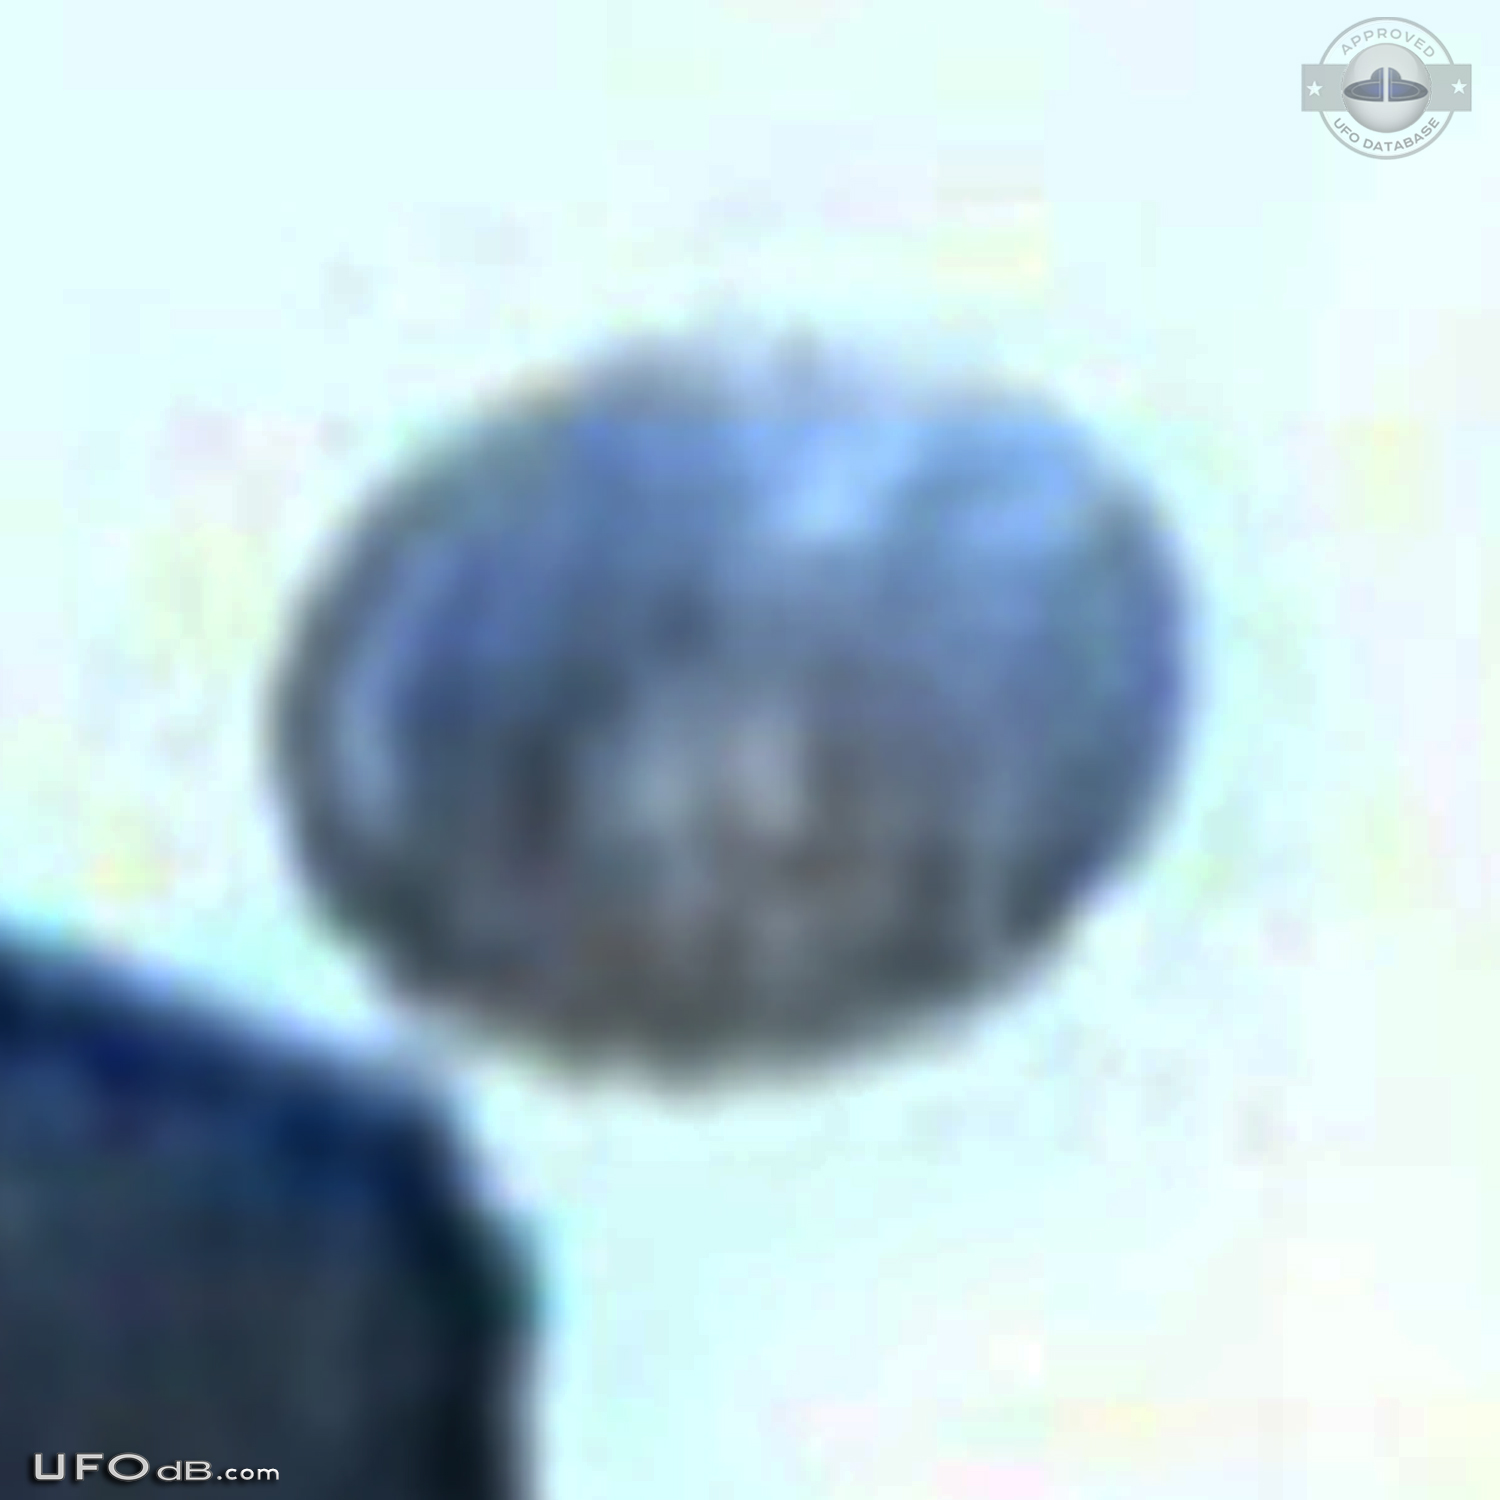 Saucer UFO seen right over Church in Norwich, Norfolk UK 2005 UFO Picture #587-5